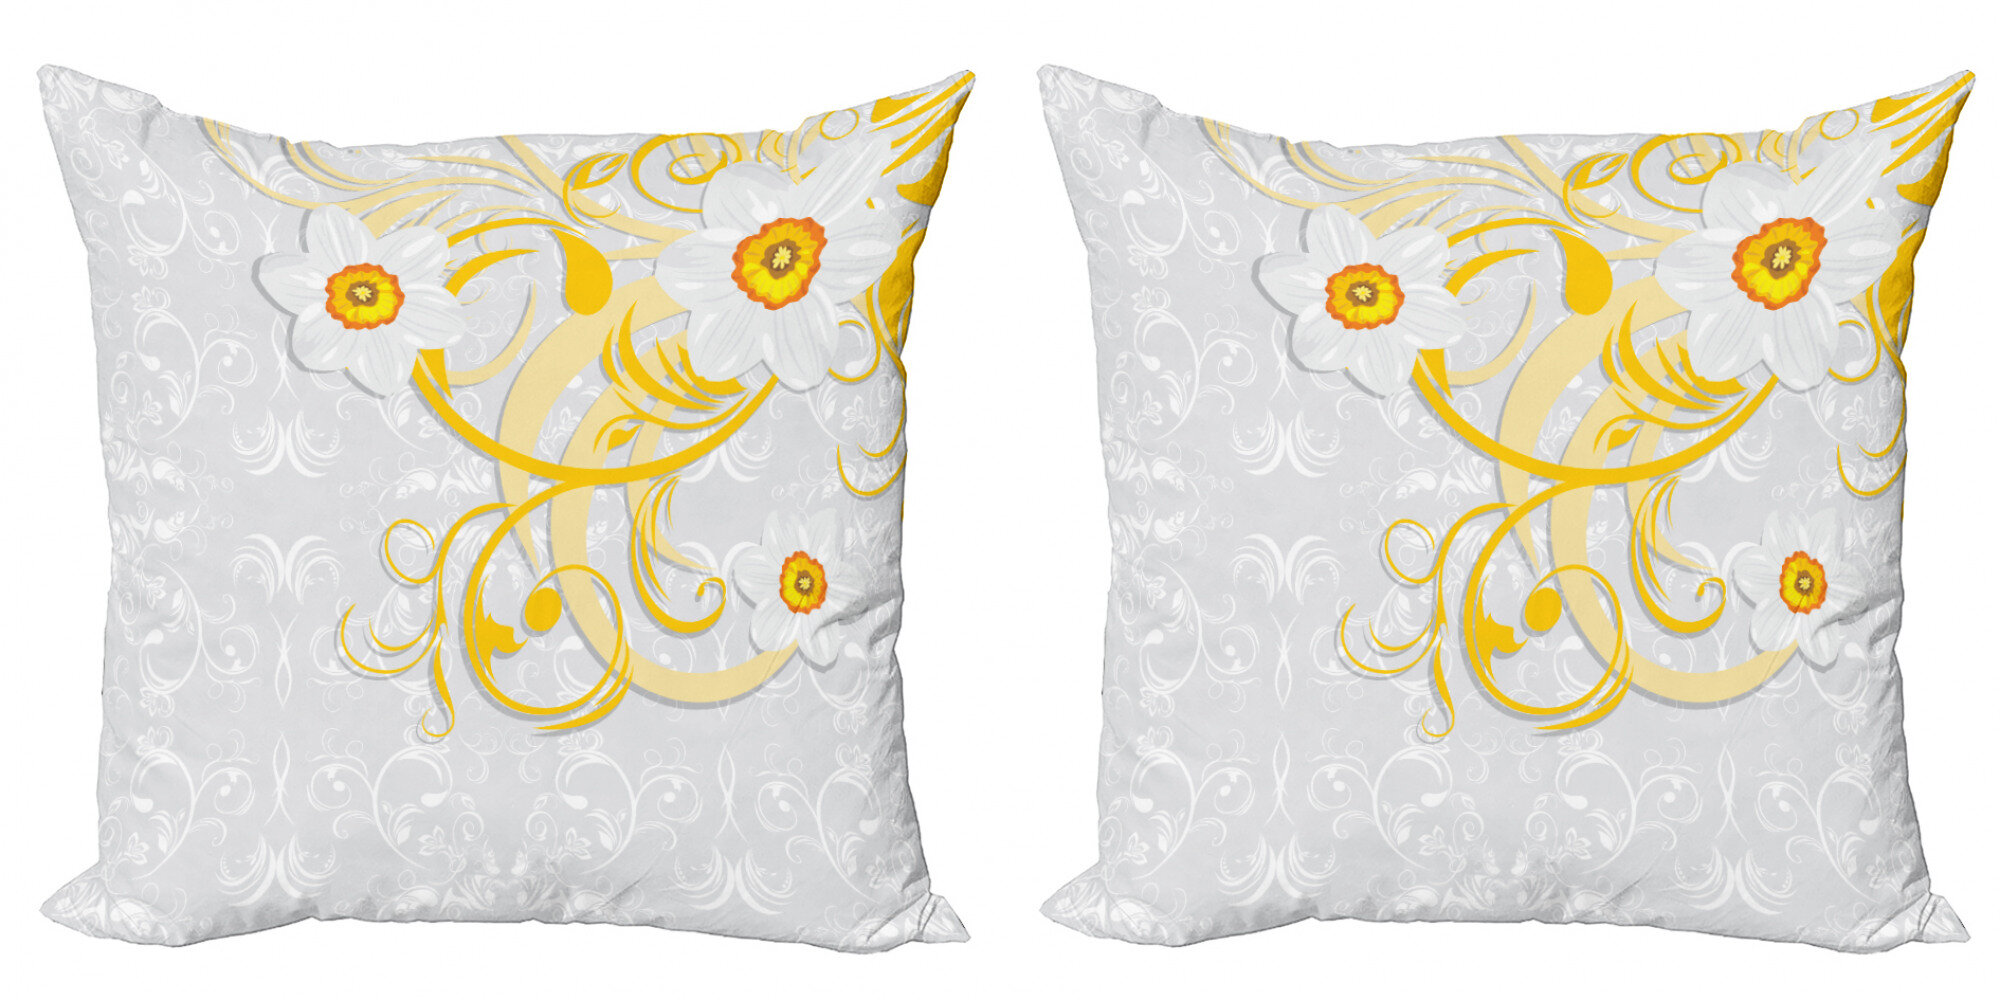 Batmerry Spring Pillows Decorative Throw Pillow Covers 18x18 Inch Set of 2 Spring White Daffodils Flowers Delicate Pattern Double Sided Square Pillow Cases Pillowcase Sofa Cushion